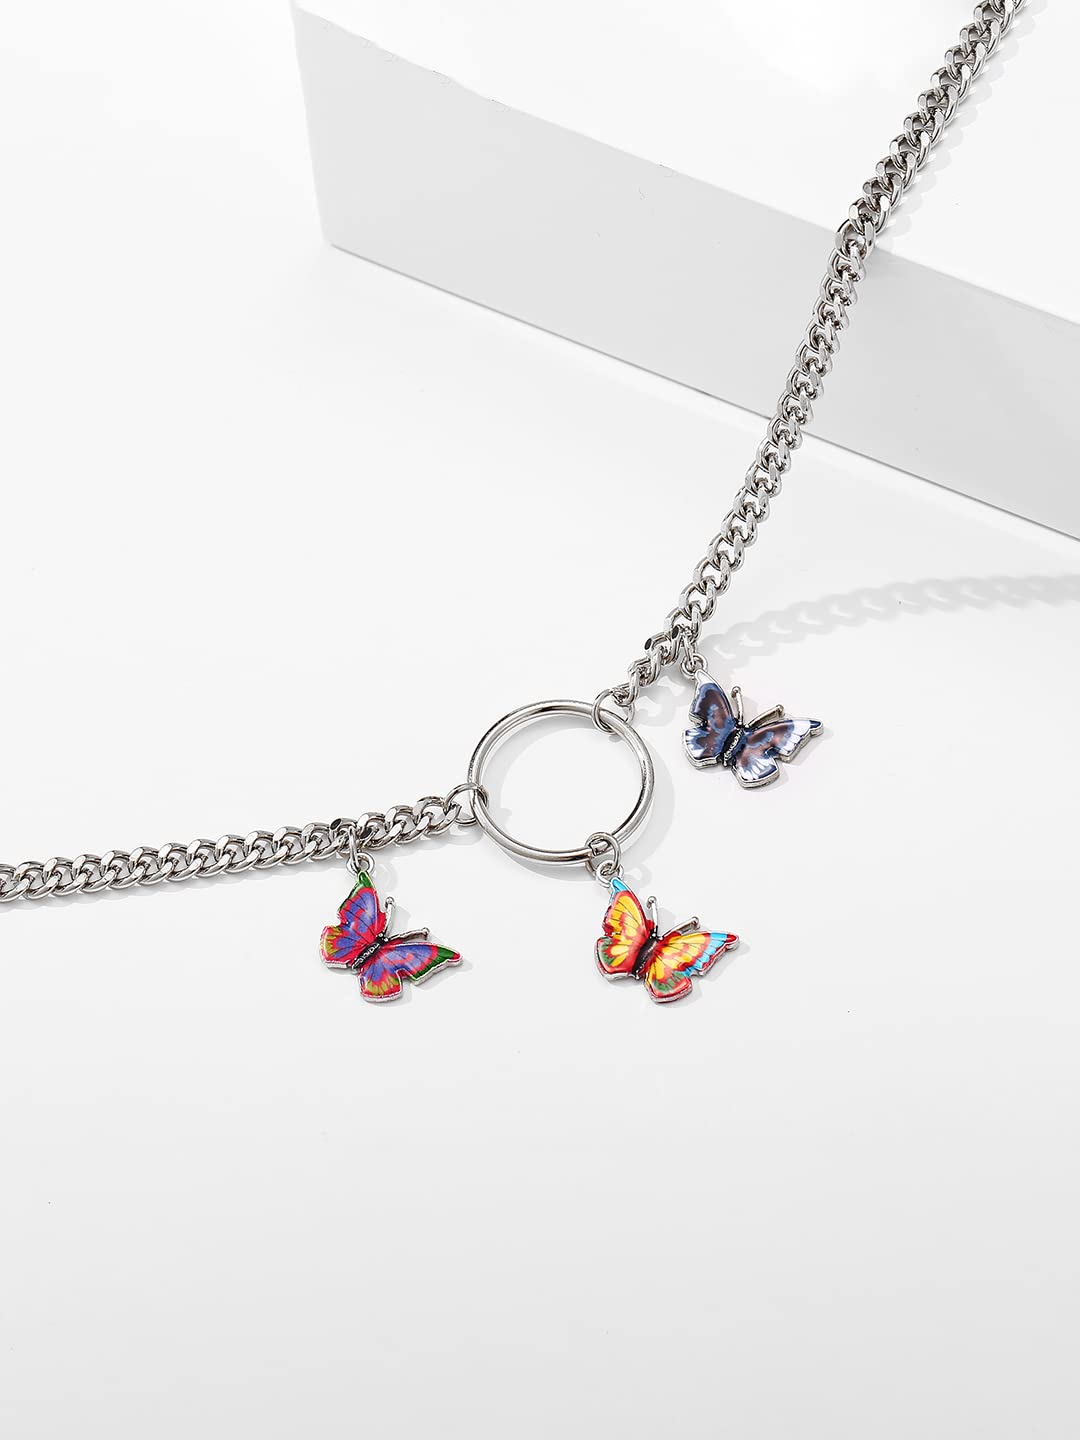 Yellow Chimes Necklace For Women Silver Tone Linked Chain With Multicolor Three Butterfly Charm Hanging Necklace For Women and Girls